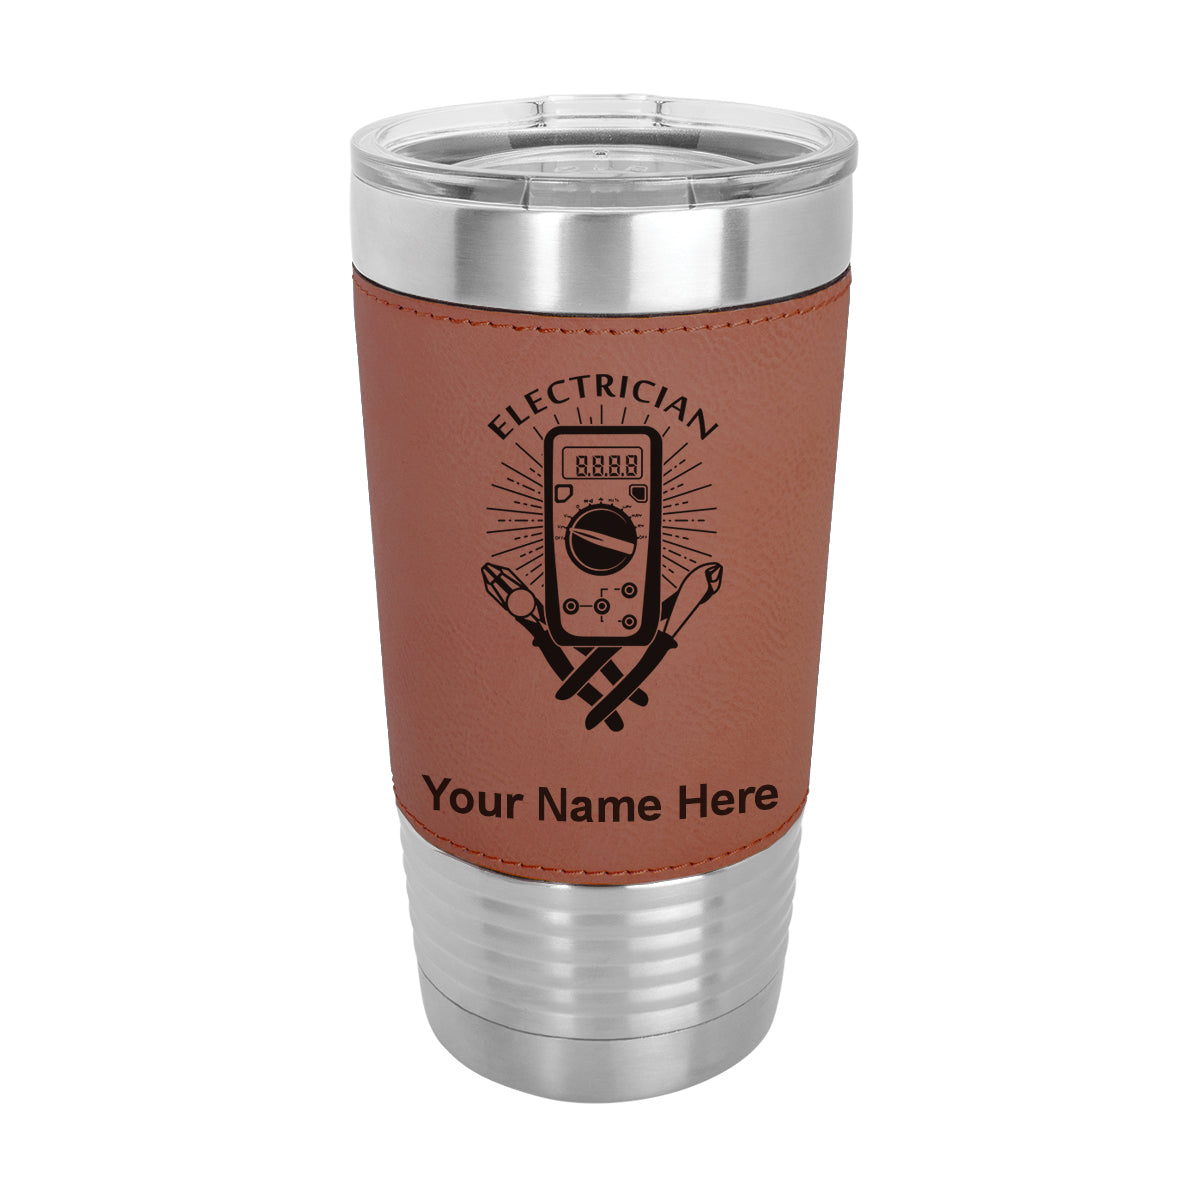 20oz Faux Leather Tumbler Mug, Electrician, Personalized Engraving Included - LaserGram Custom Engraved Gifts